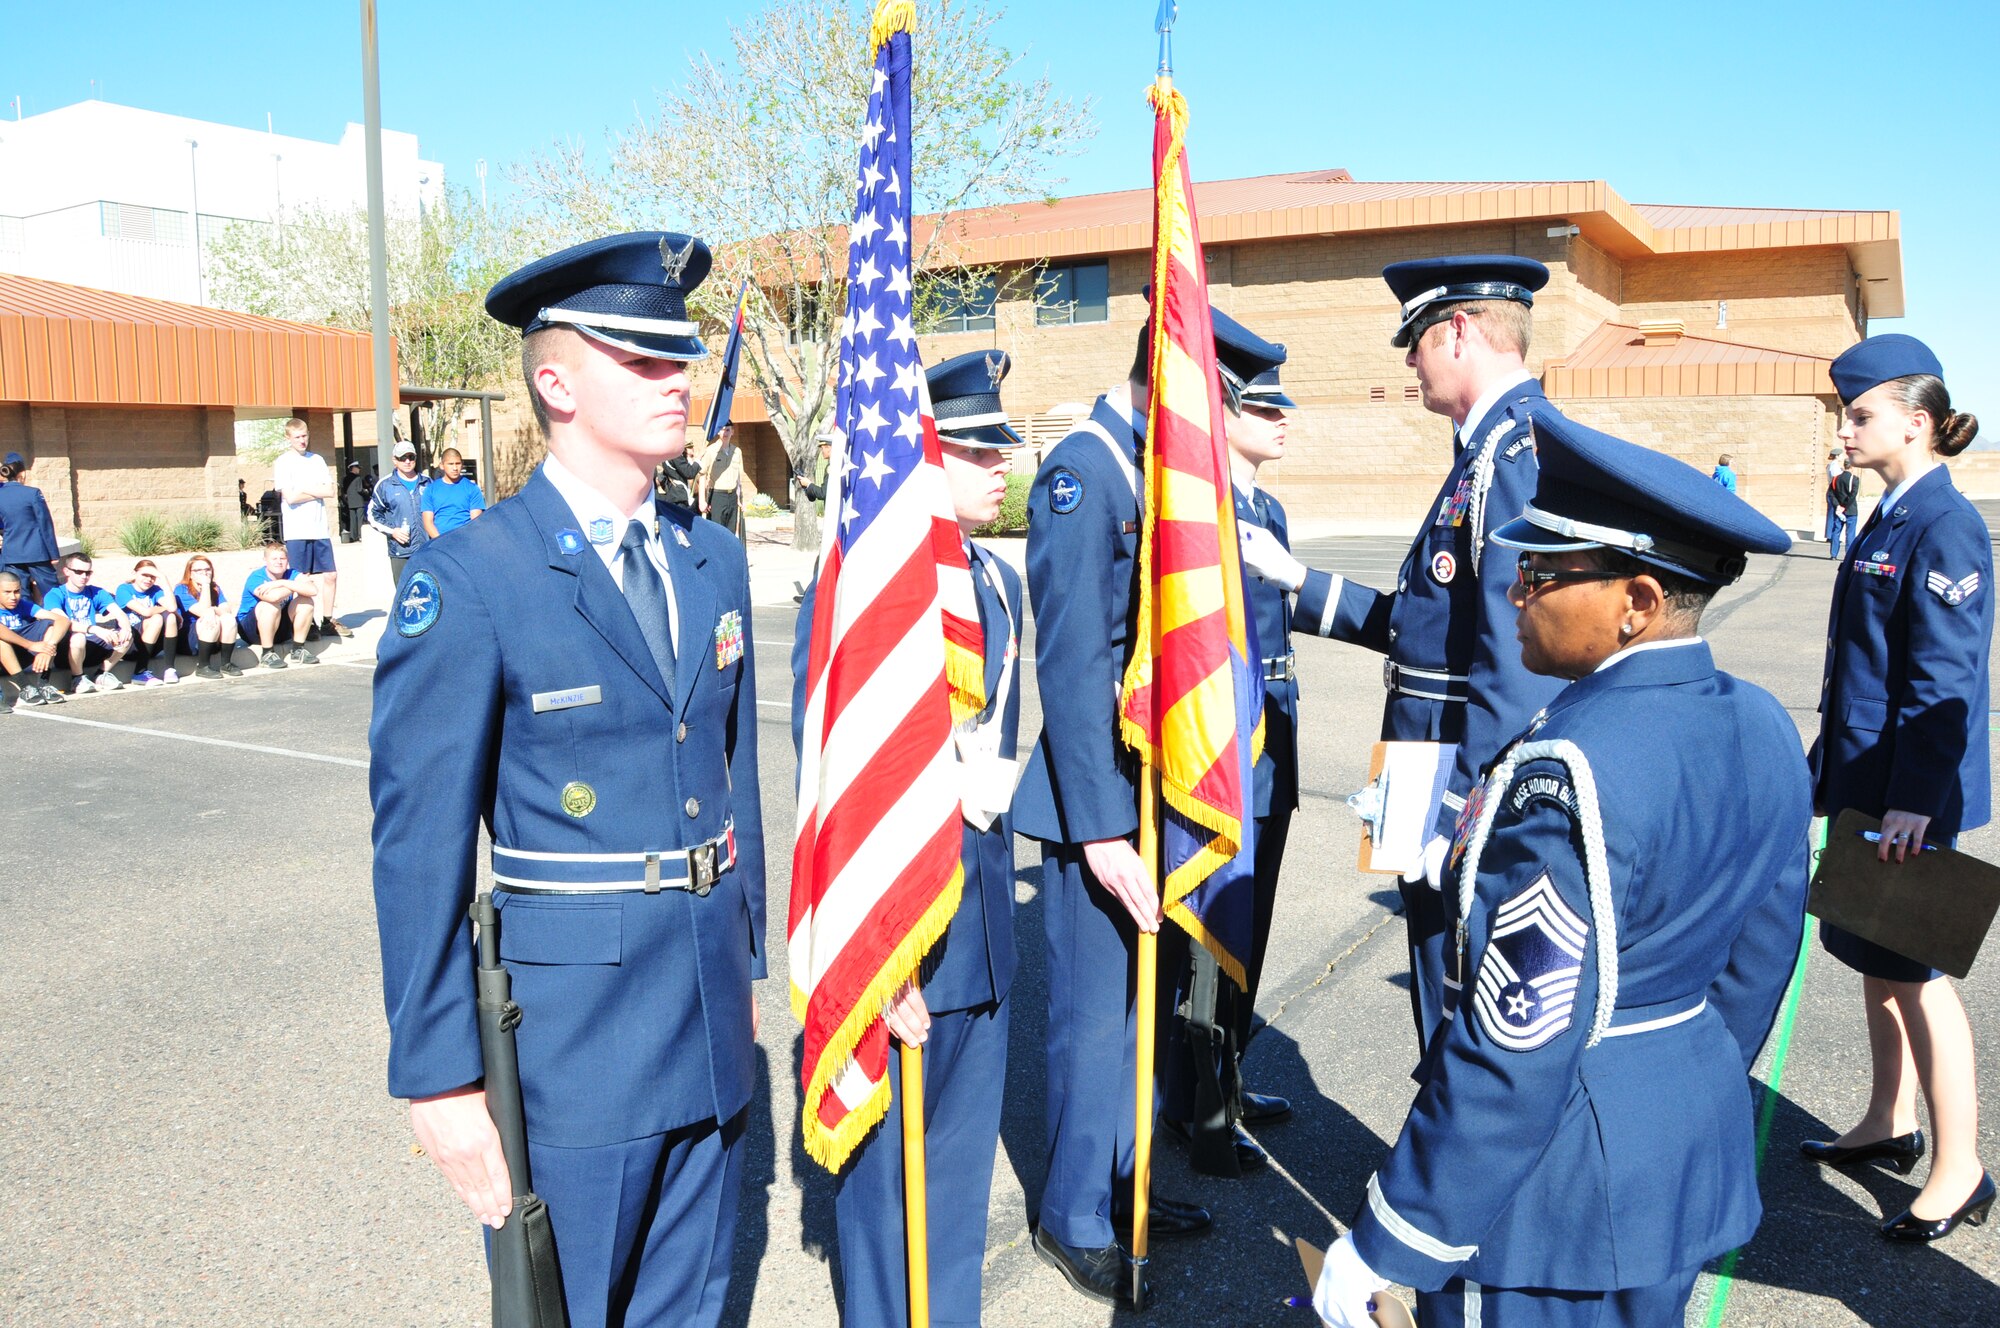 Members of the 161st Air Refueling Wing color guard inspect a Junior Reserve Officer Training Corps color guard during the West-Mitchell Invitational Drill Meet in Phoenix, Feb. 20. (U.S. Air National Guard photo by Master Sgt. Charles Wade)